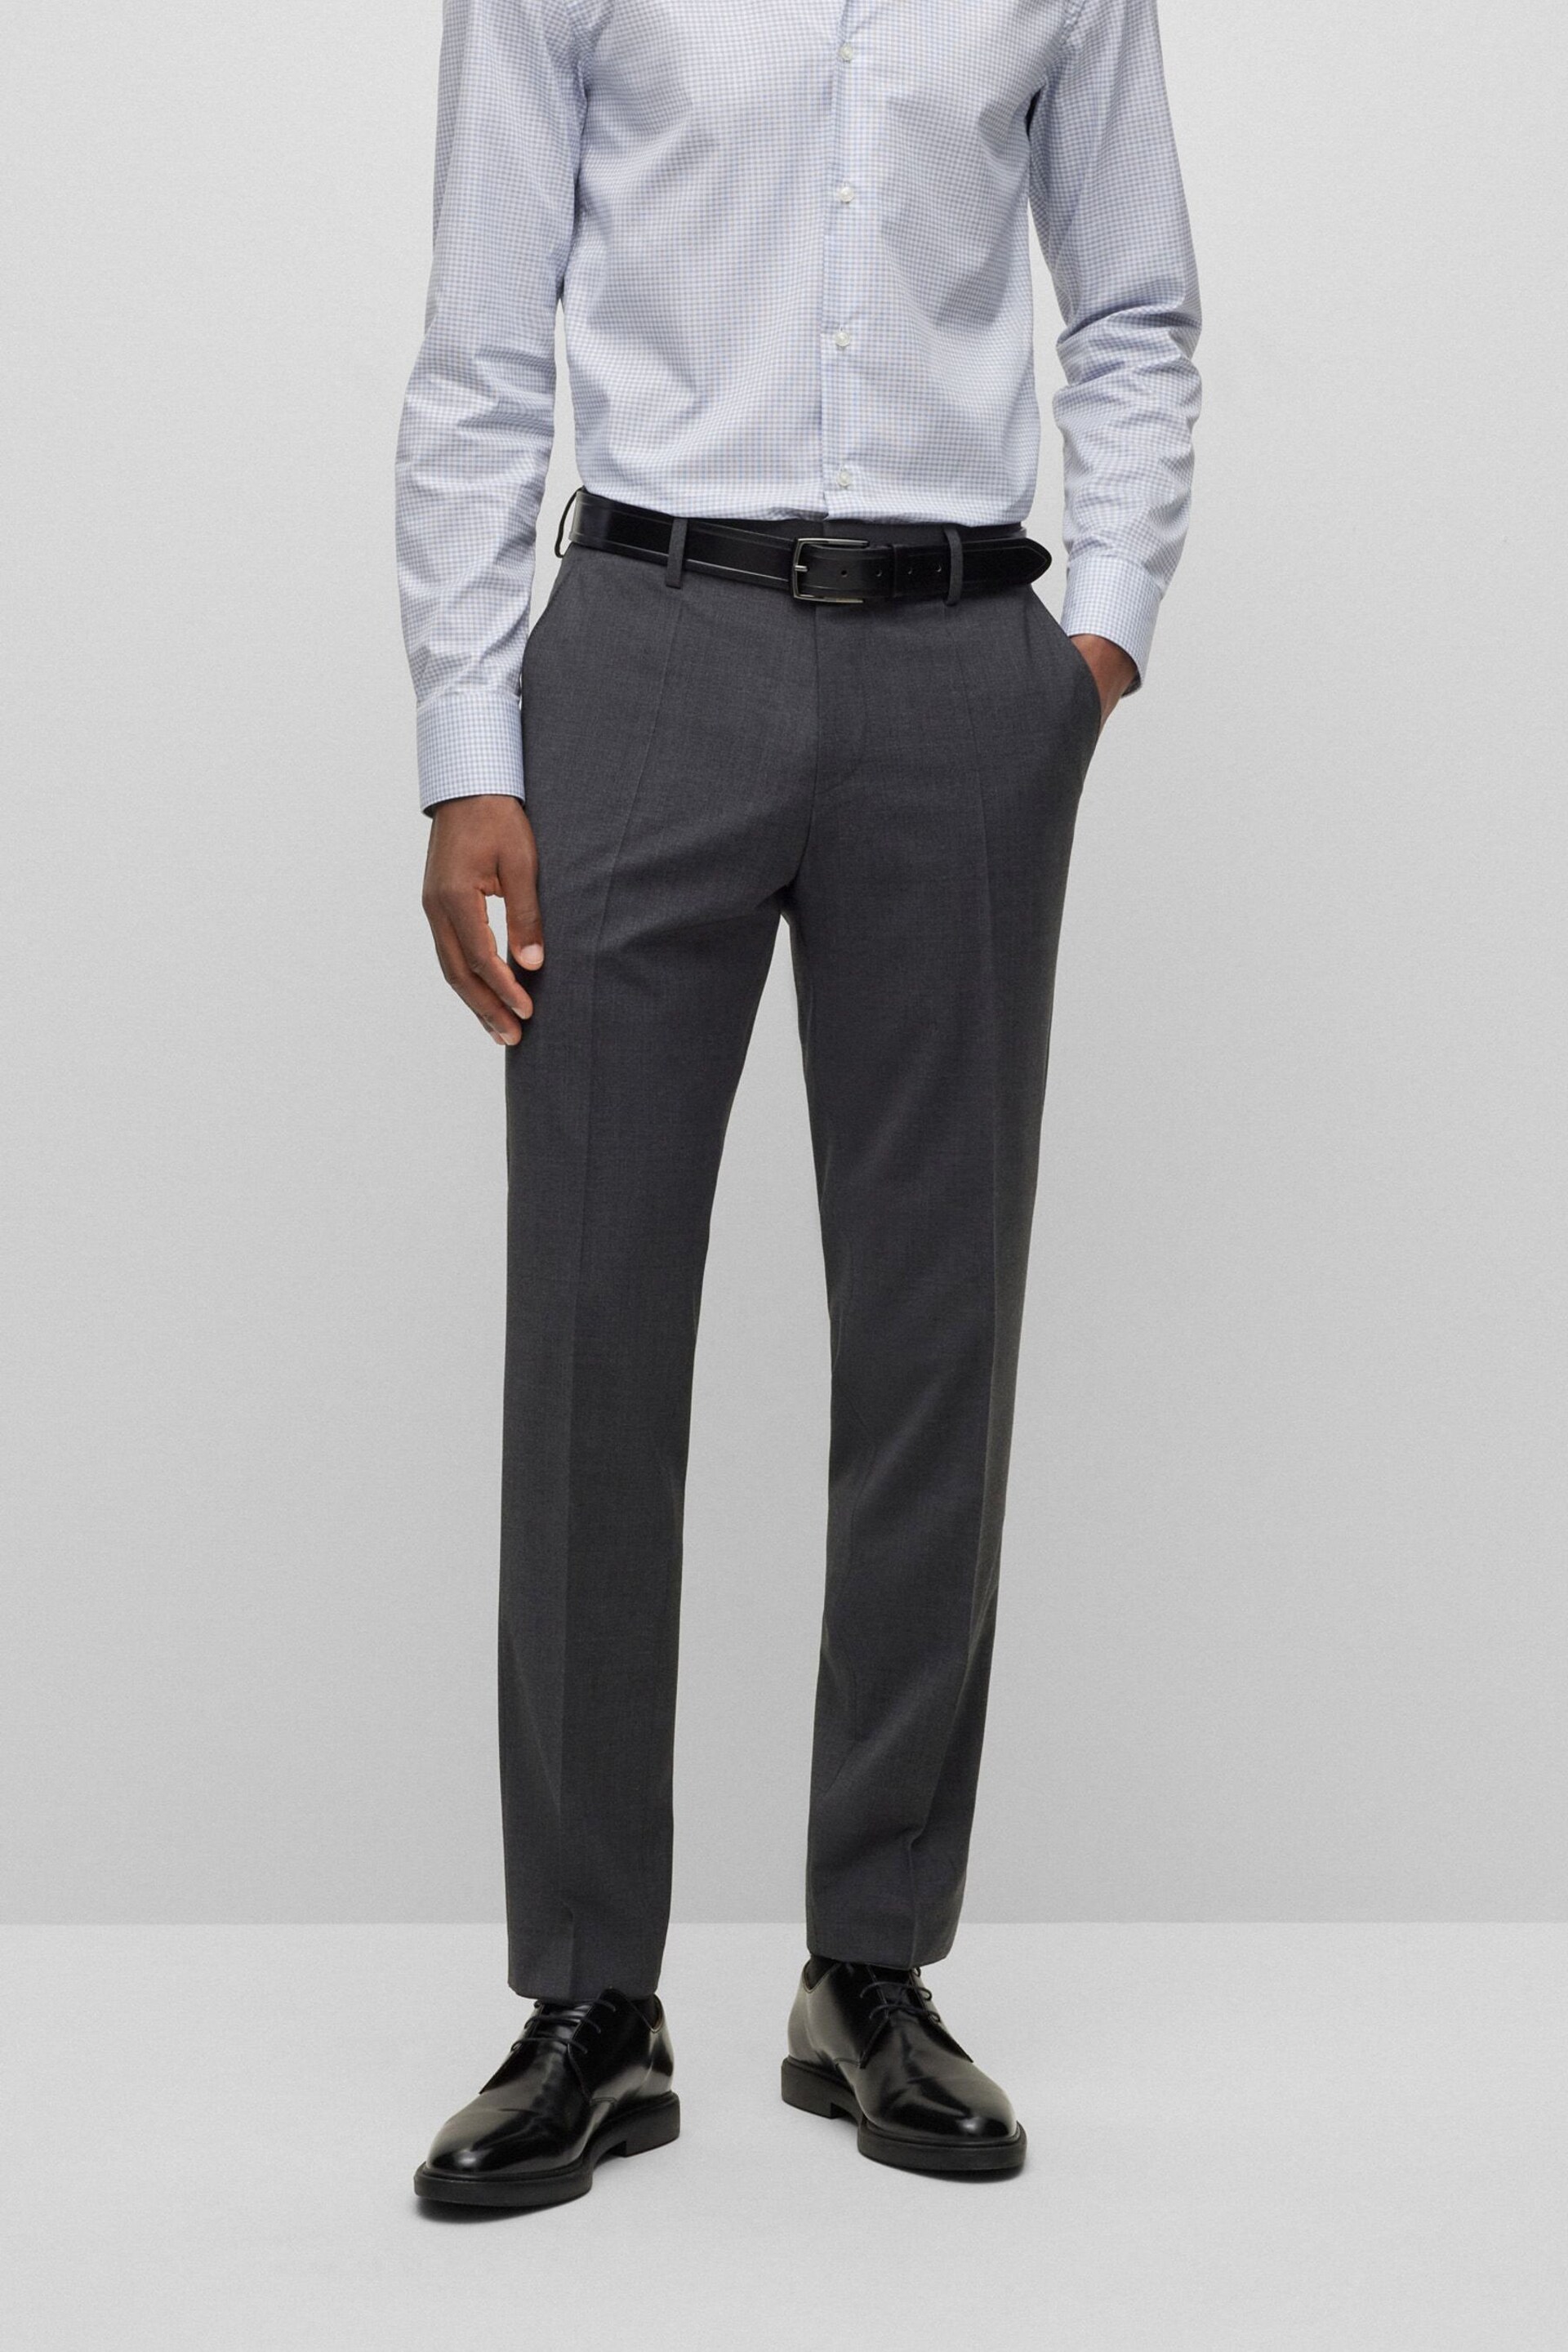 BOSS Grey Slim Fit Suit :Trousers - Image 1 of 6